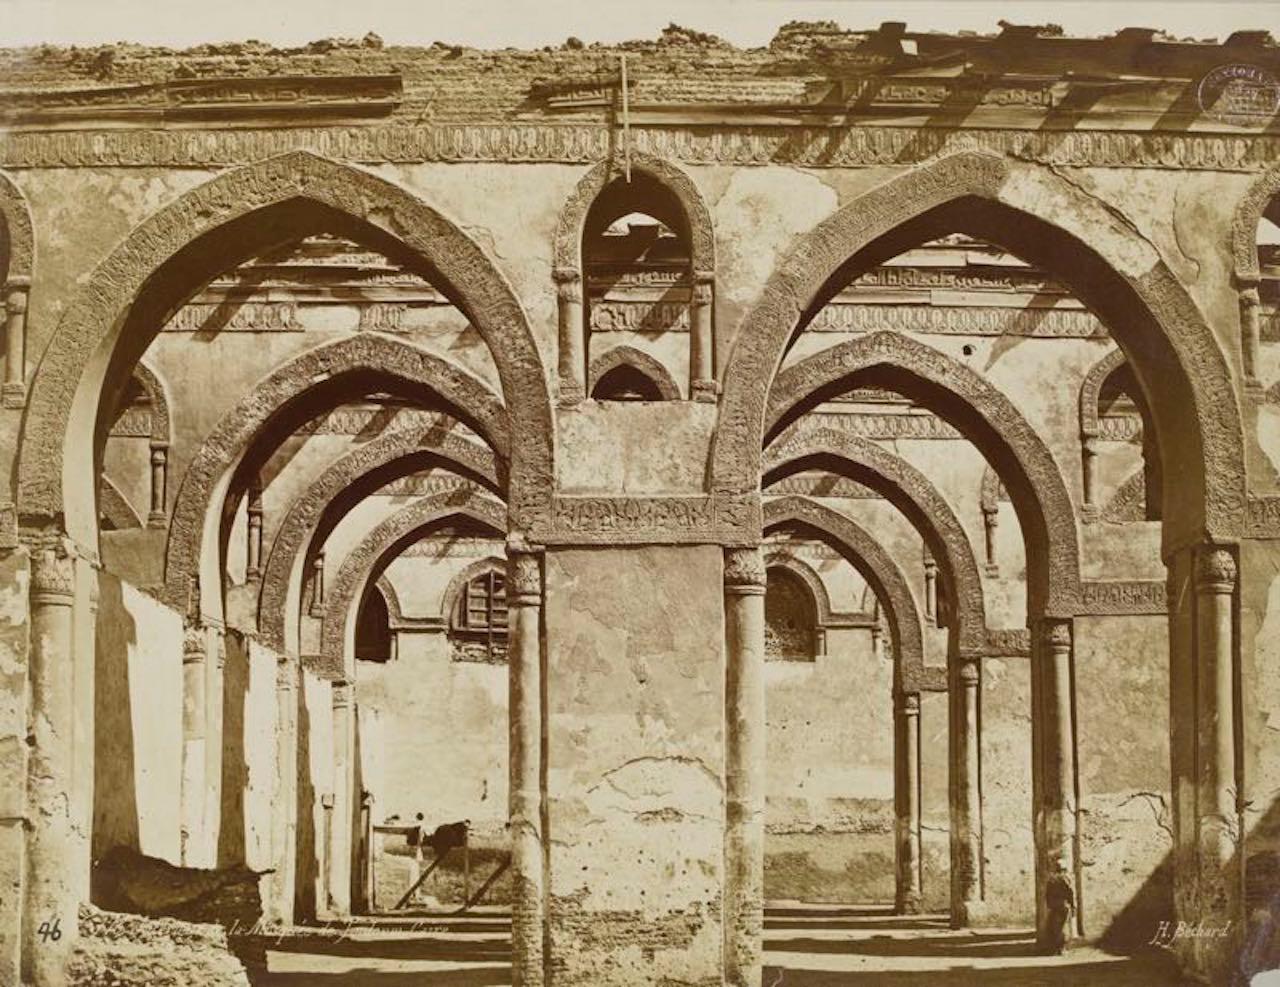 Unknown Landscape Photograph - V&A Museum London 'Interior Of The Mosque Of Ibn Tulun'